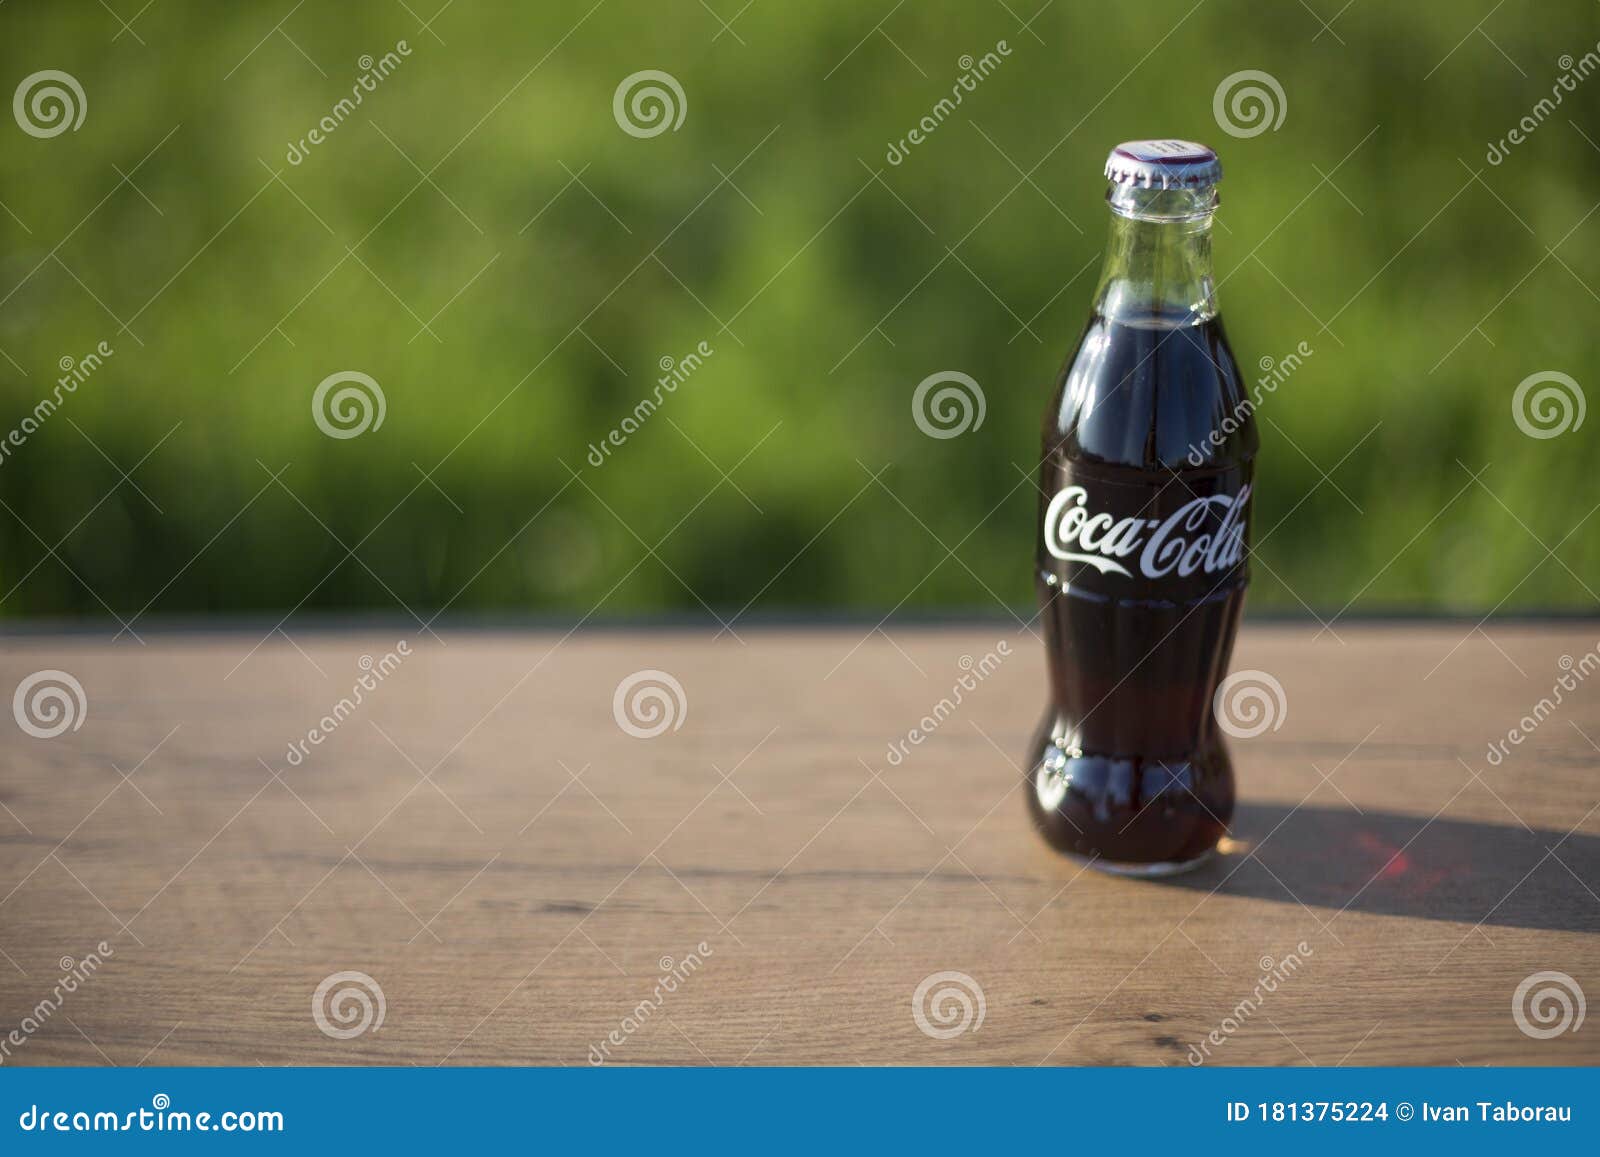 Playful sund fornuft Reporter Atlanta USA May 1 2020 Classic Glass Coca Cola Bottle on Wooden Table  Outdoors Editorial Stock Image - Image of caffeine, coke: 181375224